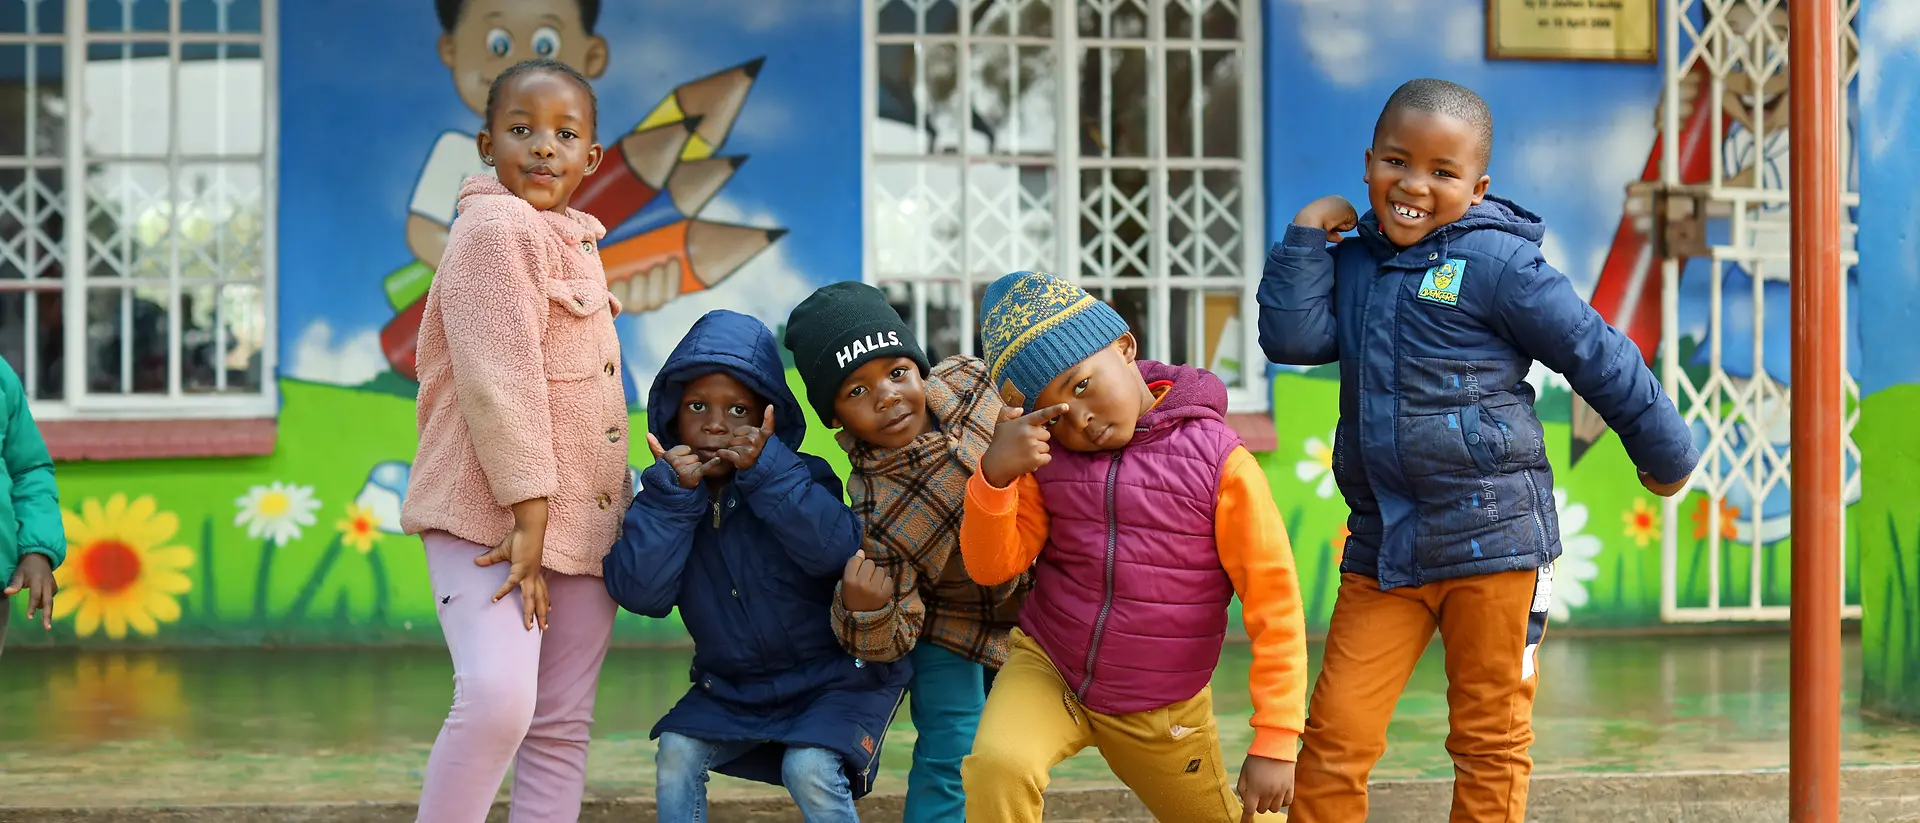 Five children stand next to each other in colorful clothes and make funny poses.